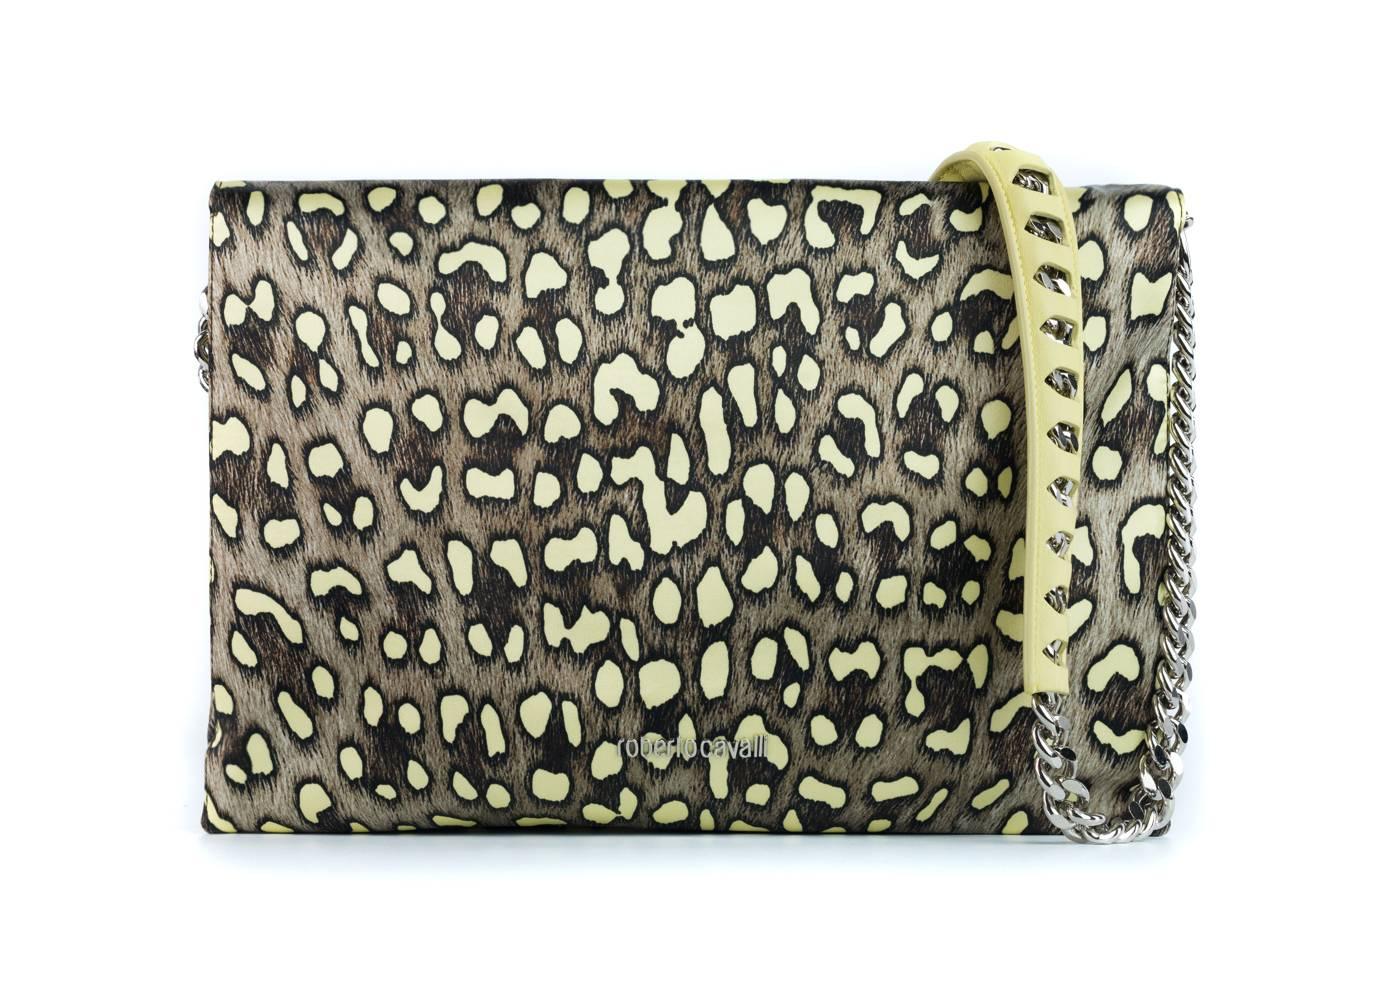 Roberto Cavalli Women's Large Juno Clutch In New Condition For Sale In Brooklyn, NY